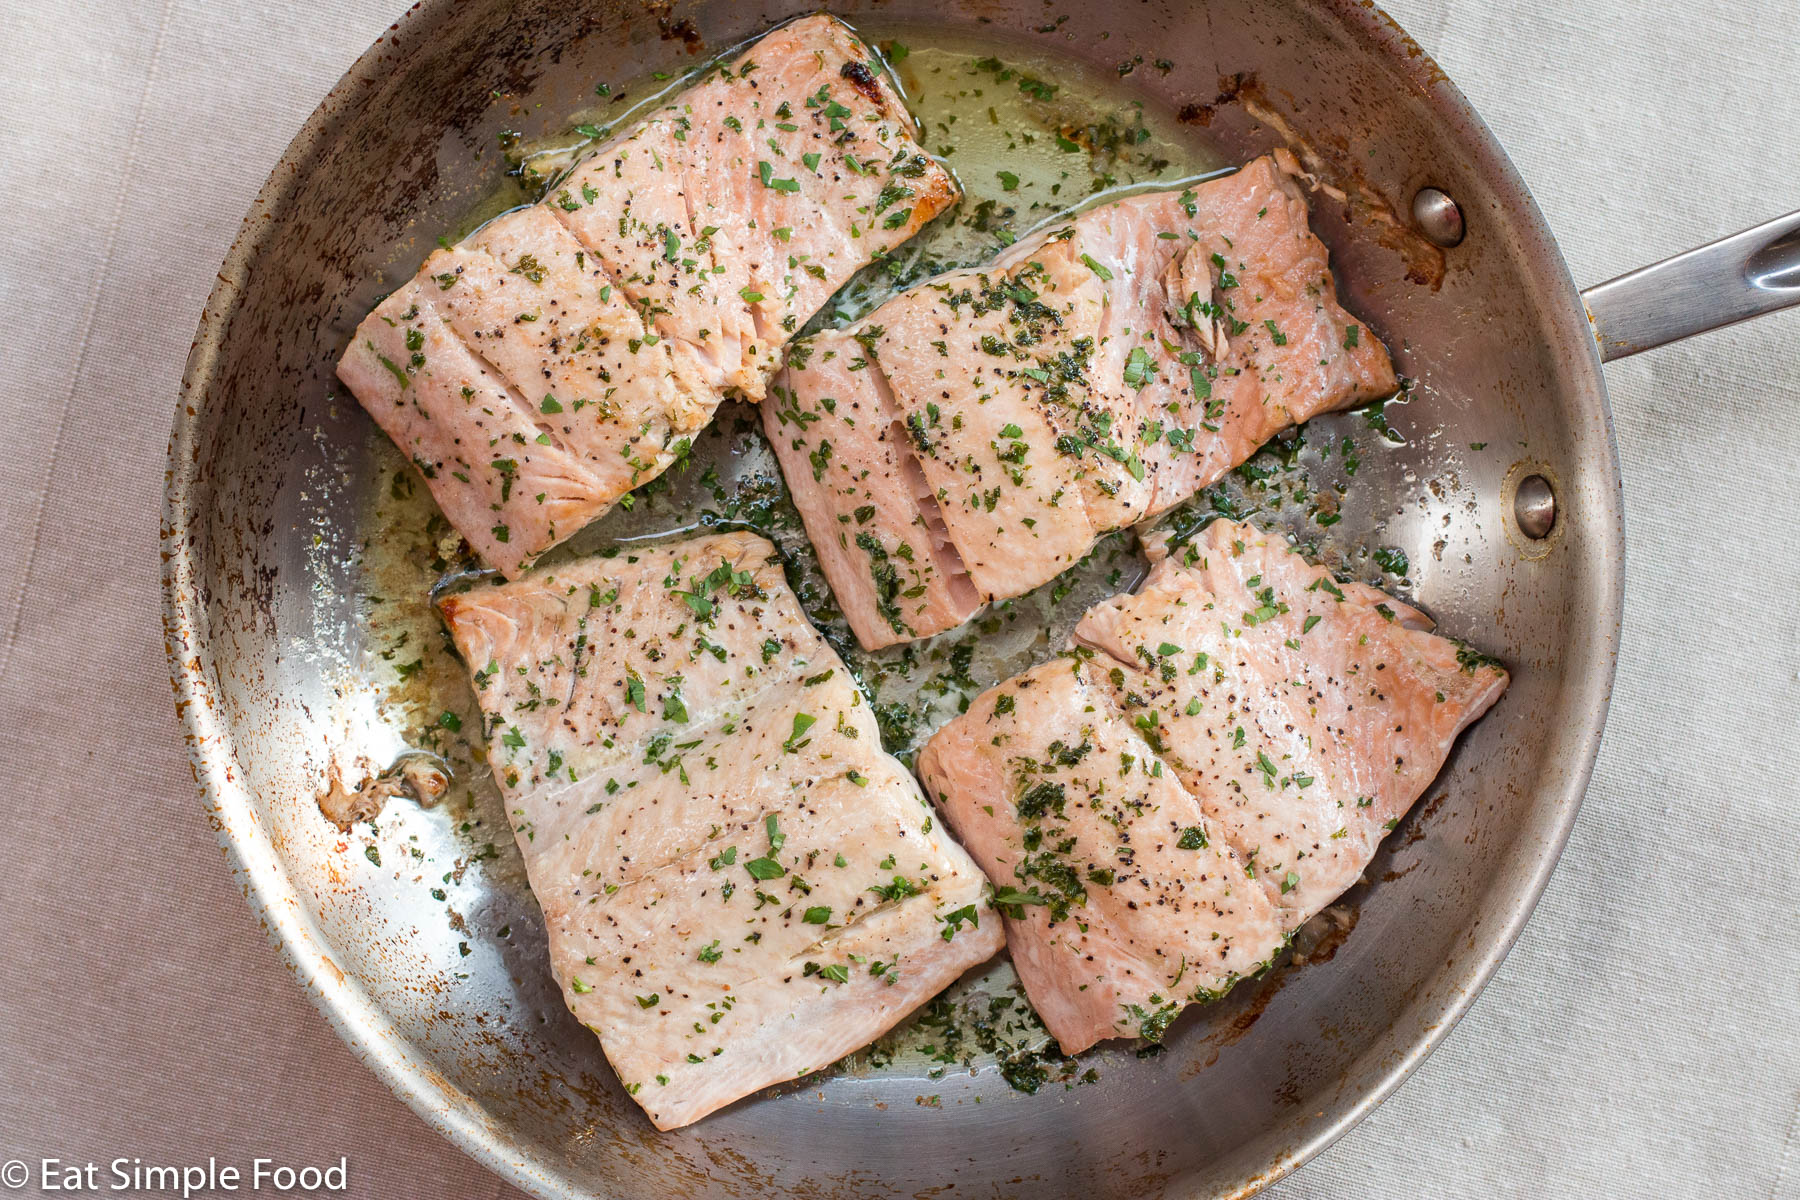 4 Pieces of Roast Salmon In a Stainless Steel Pan. Garnished with chopped parsley